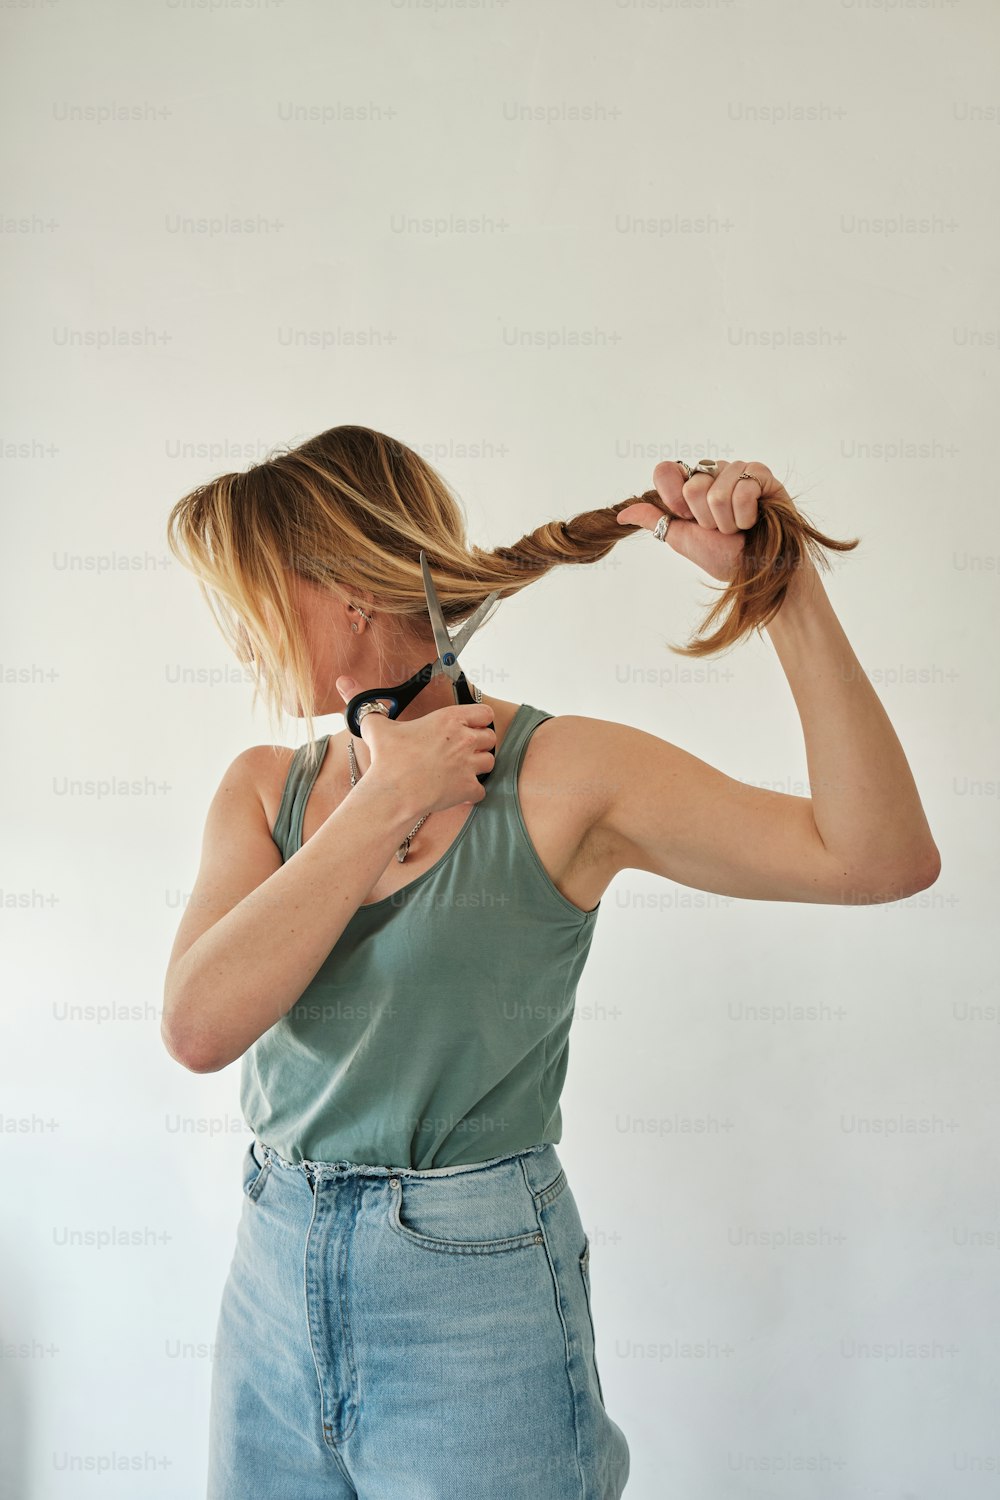 a woman cutting her hair with a pair of scissors